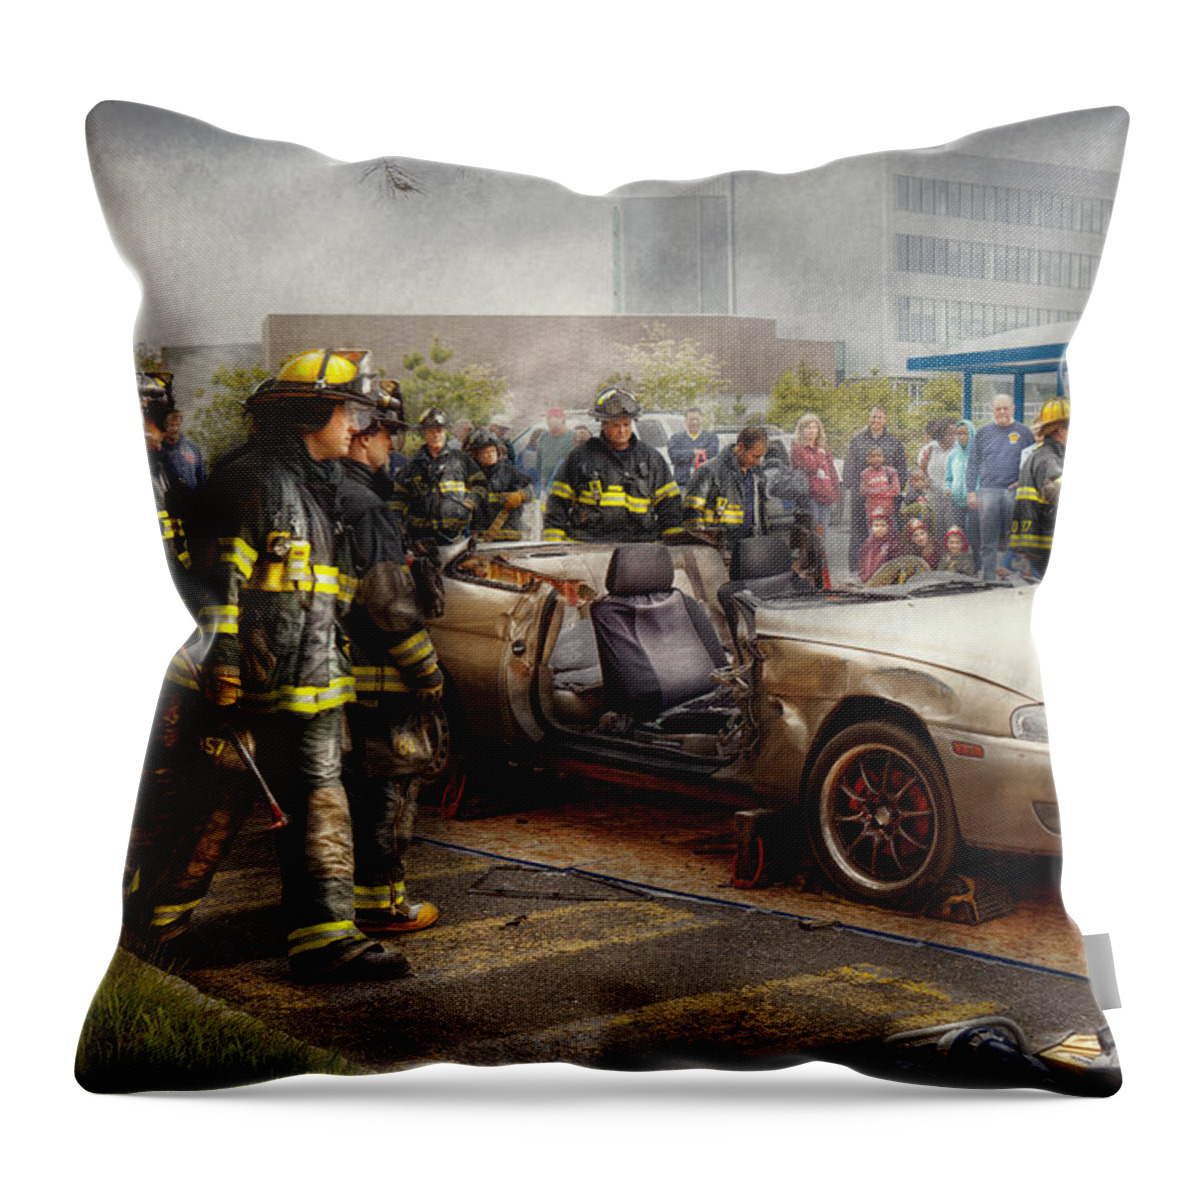 Fireman Throw Pillow featuring the photograph Firemen - The fire demonstration by Mike Savad